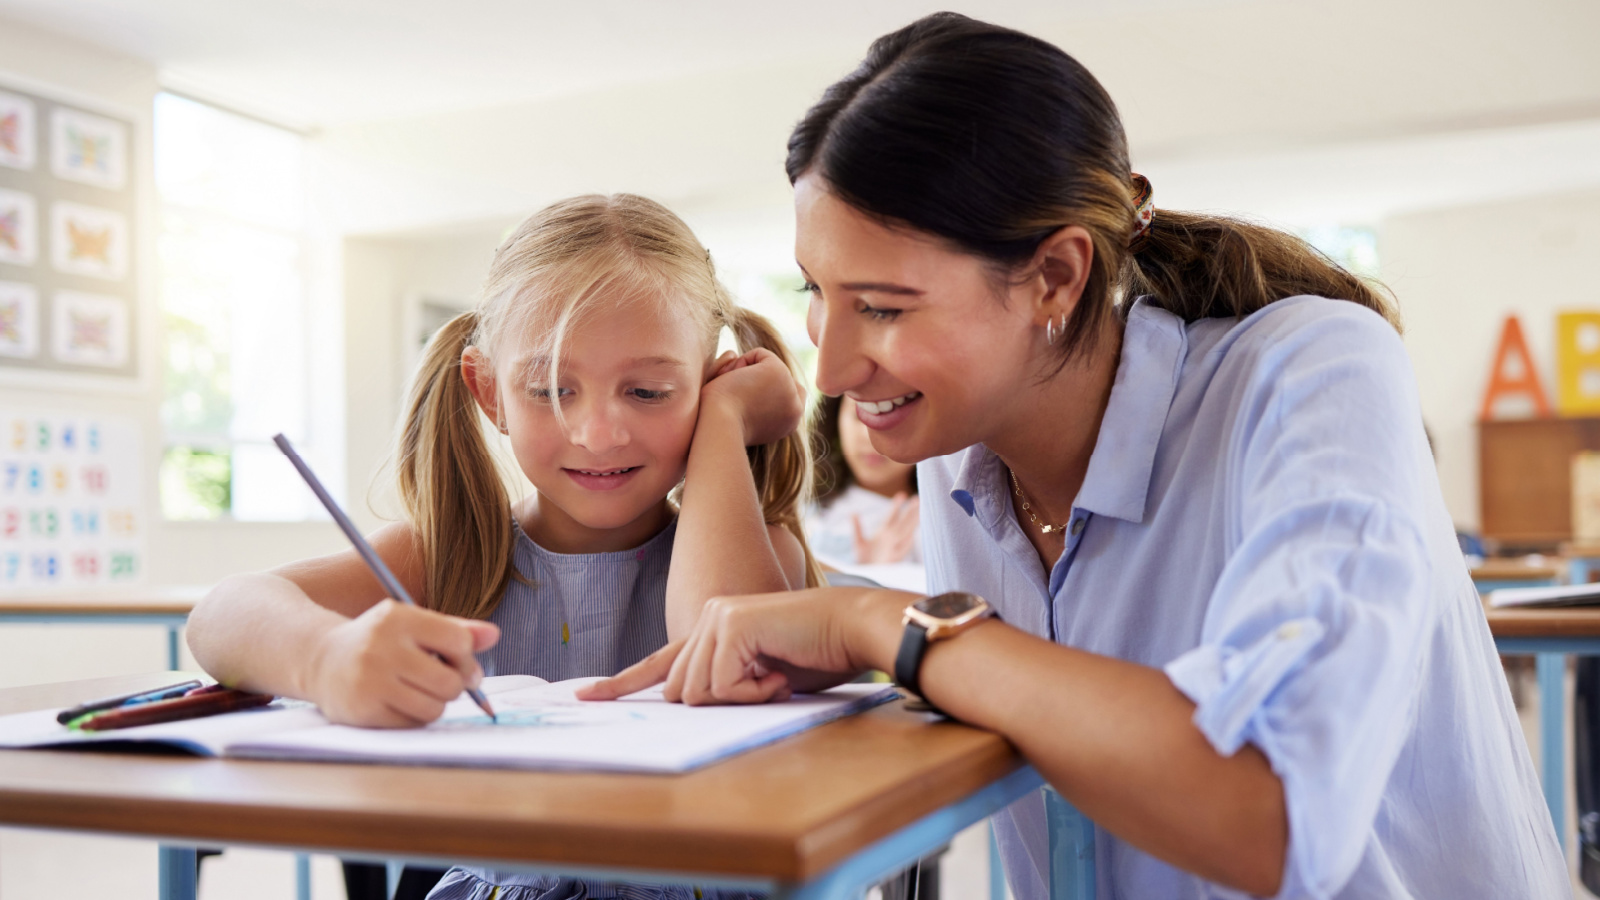 image credit: PeopleImages.com Yuri A/Shutterstock <p><span>A spokesperson for Families in Schools highlights the personal and societal stakes in addressing literacy, stressing the need for comprehensive solutions to prevent the continuation of failure and inequality in education.</span></p>